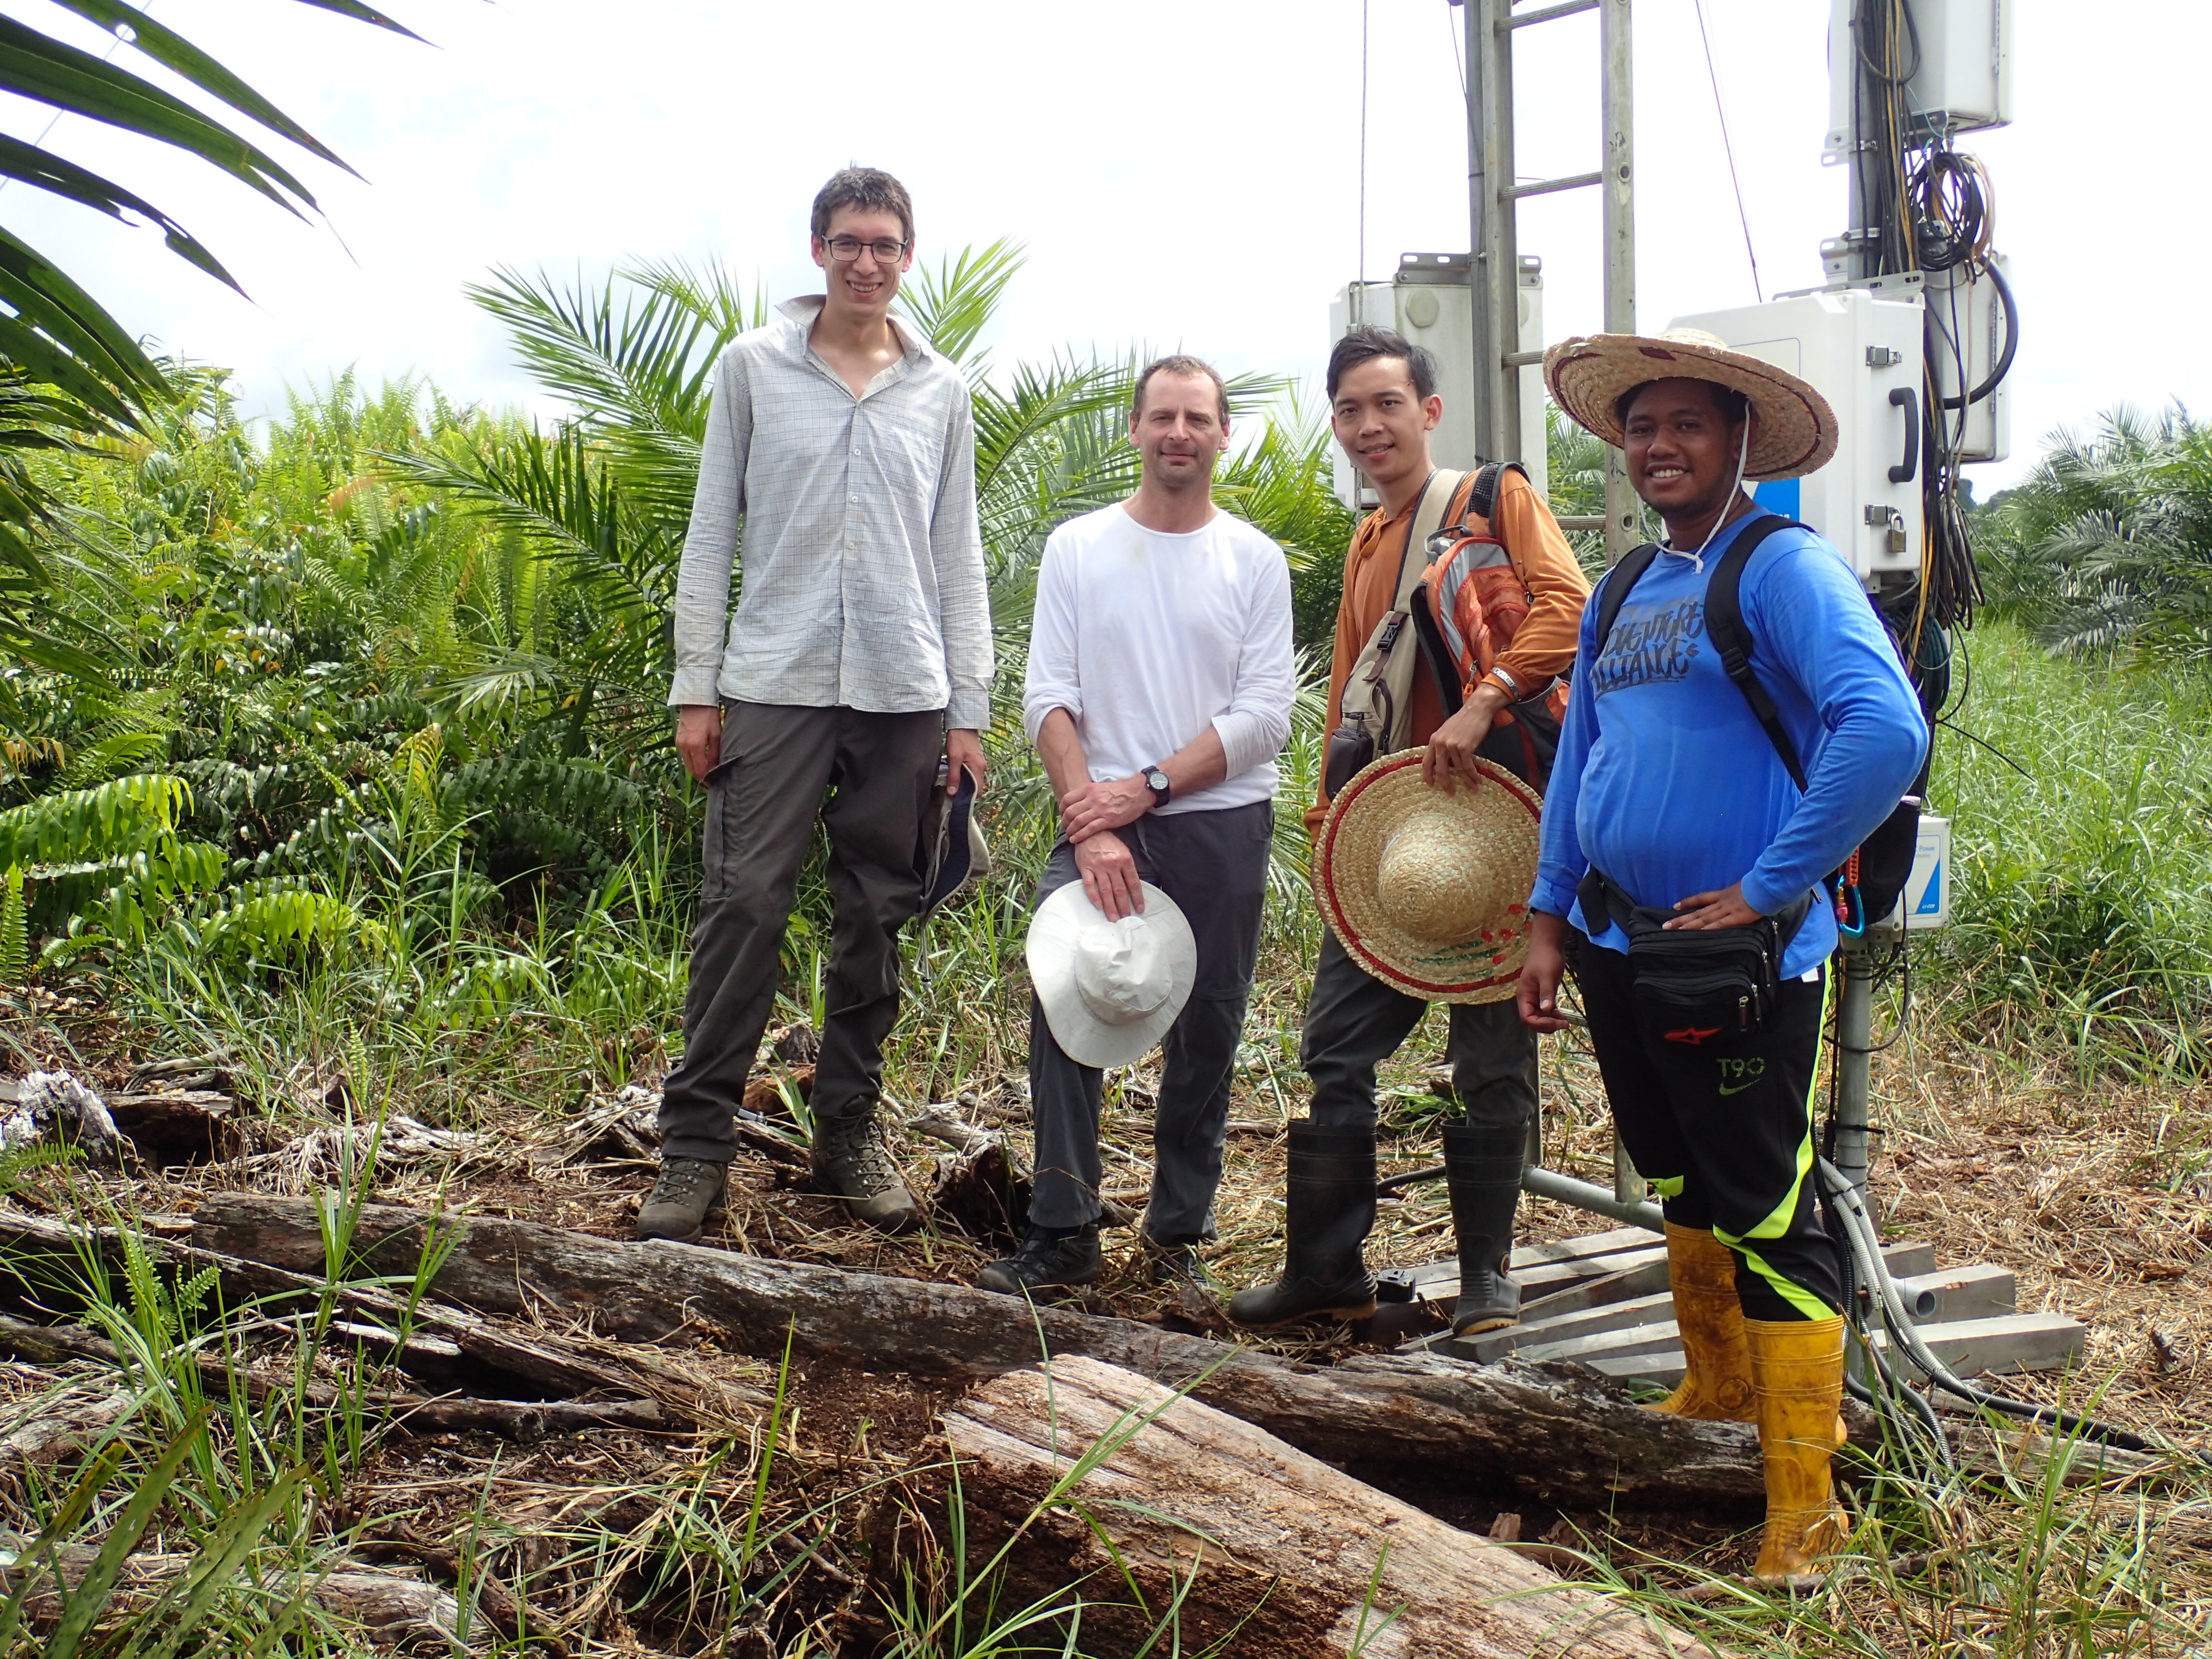 Tim Hill, Jon McCalmont, Ham and Jai at the recently converted oil palm site